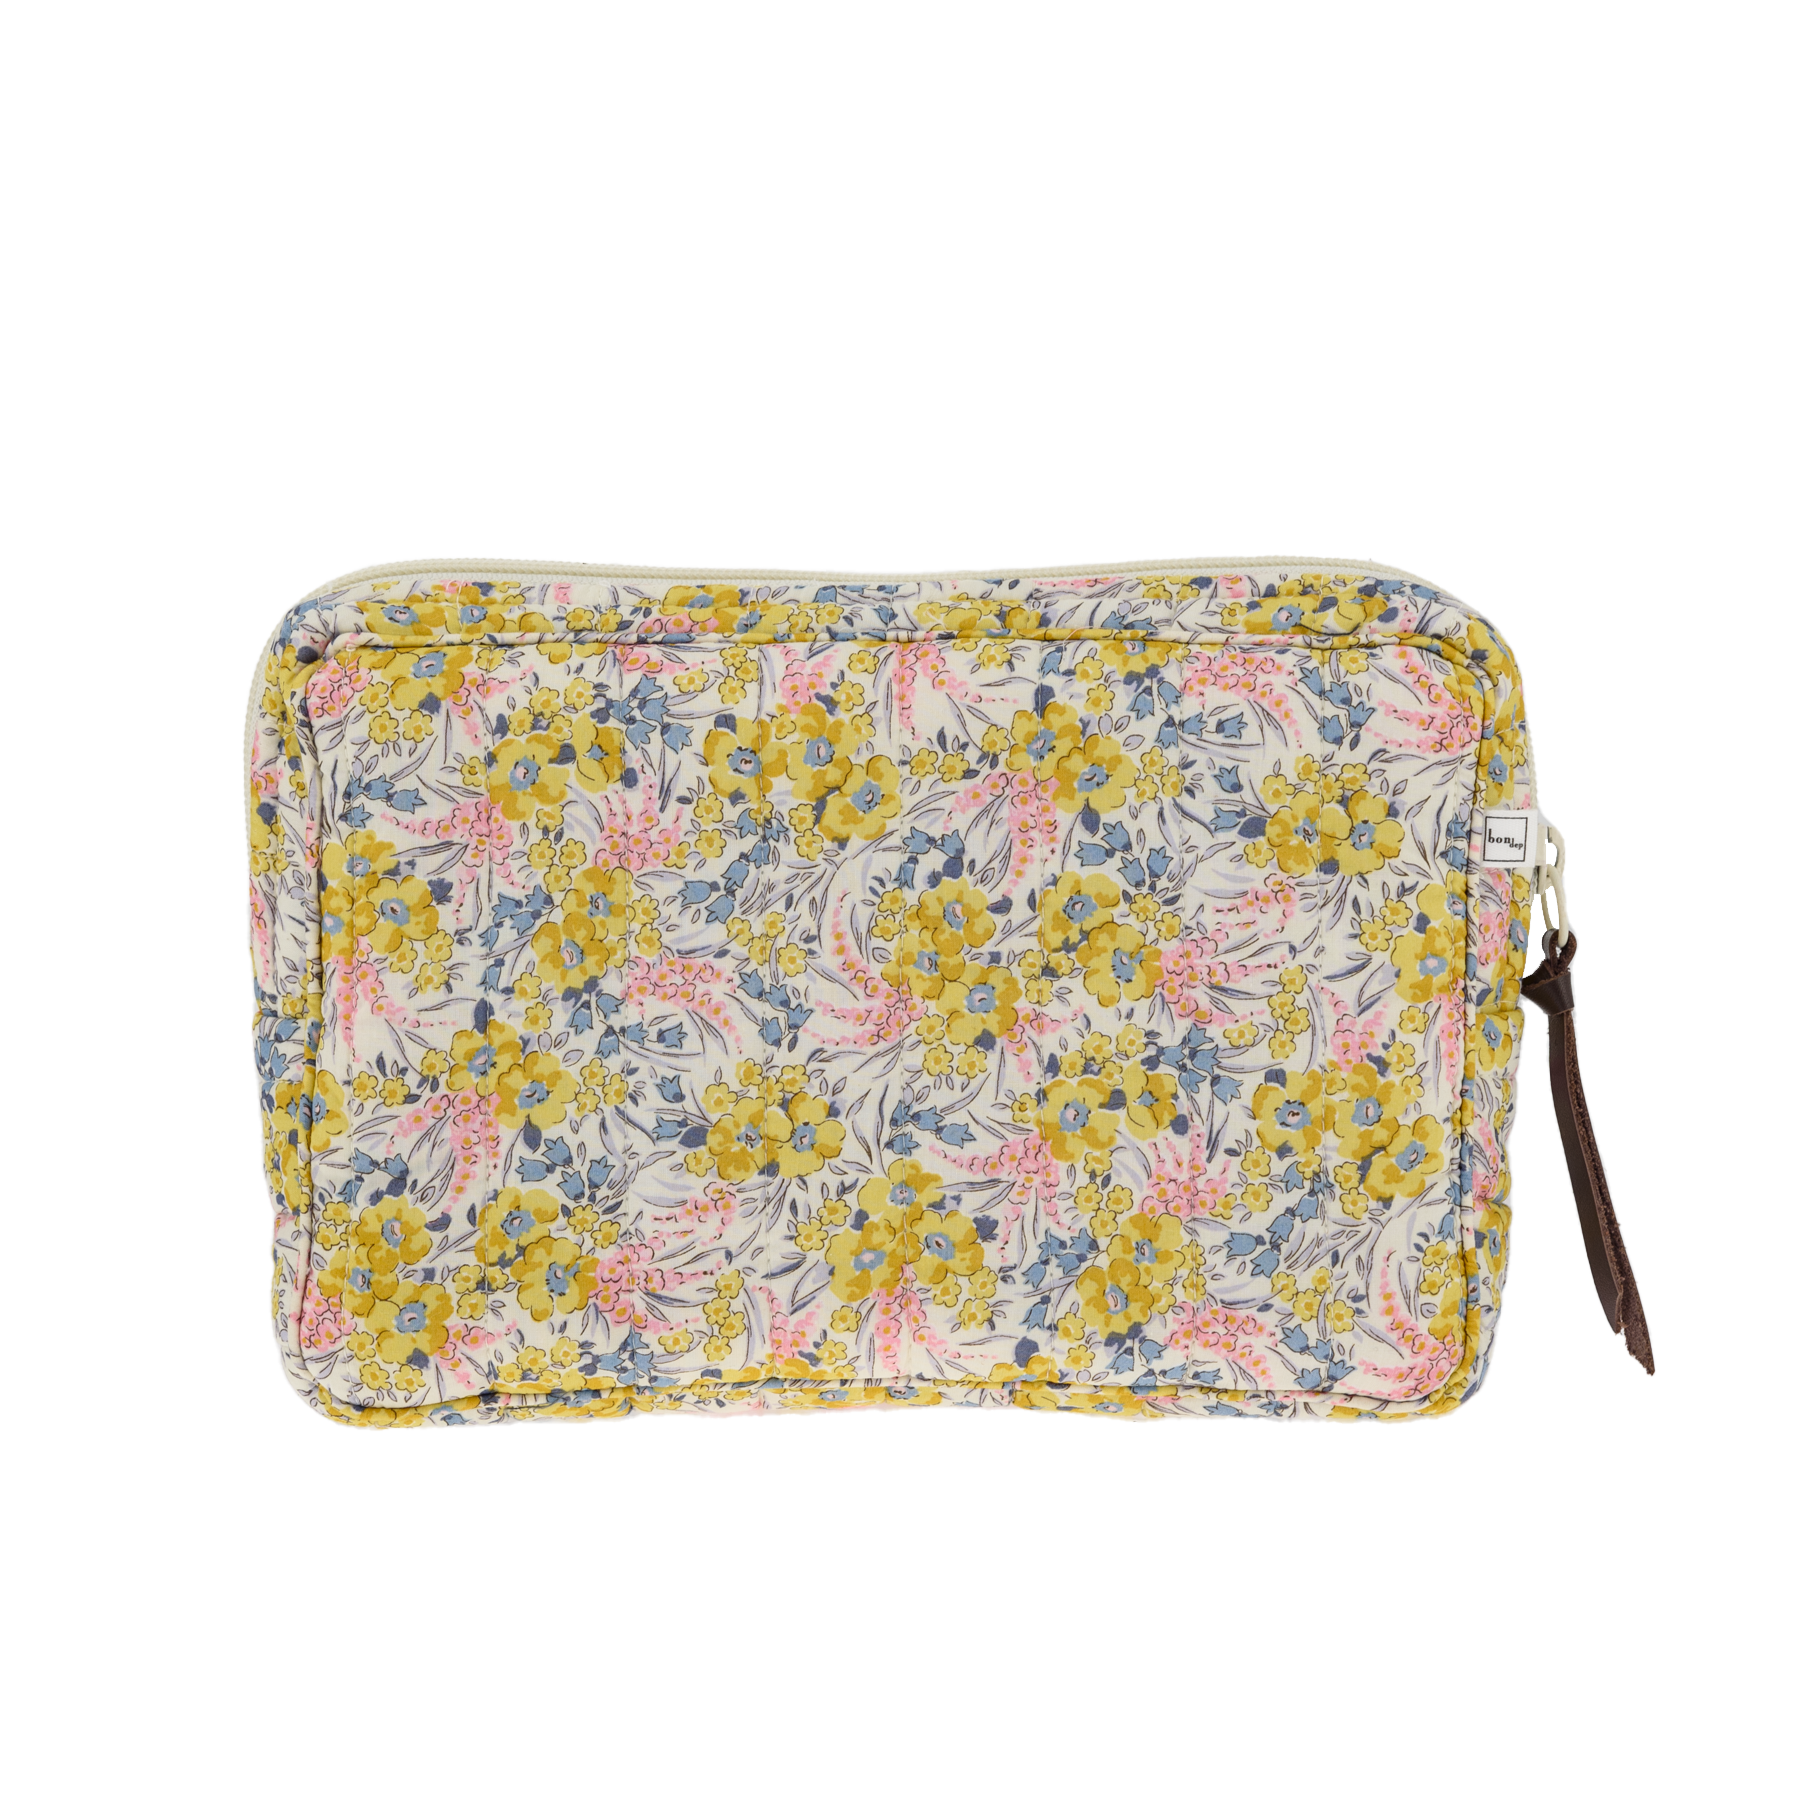 POUCH SMALL MW LIBERTY SWIRLING PETALS